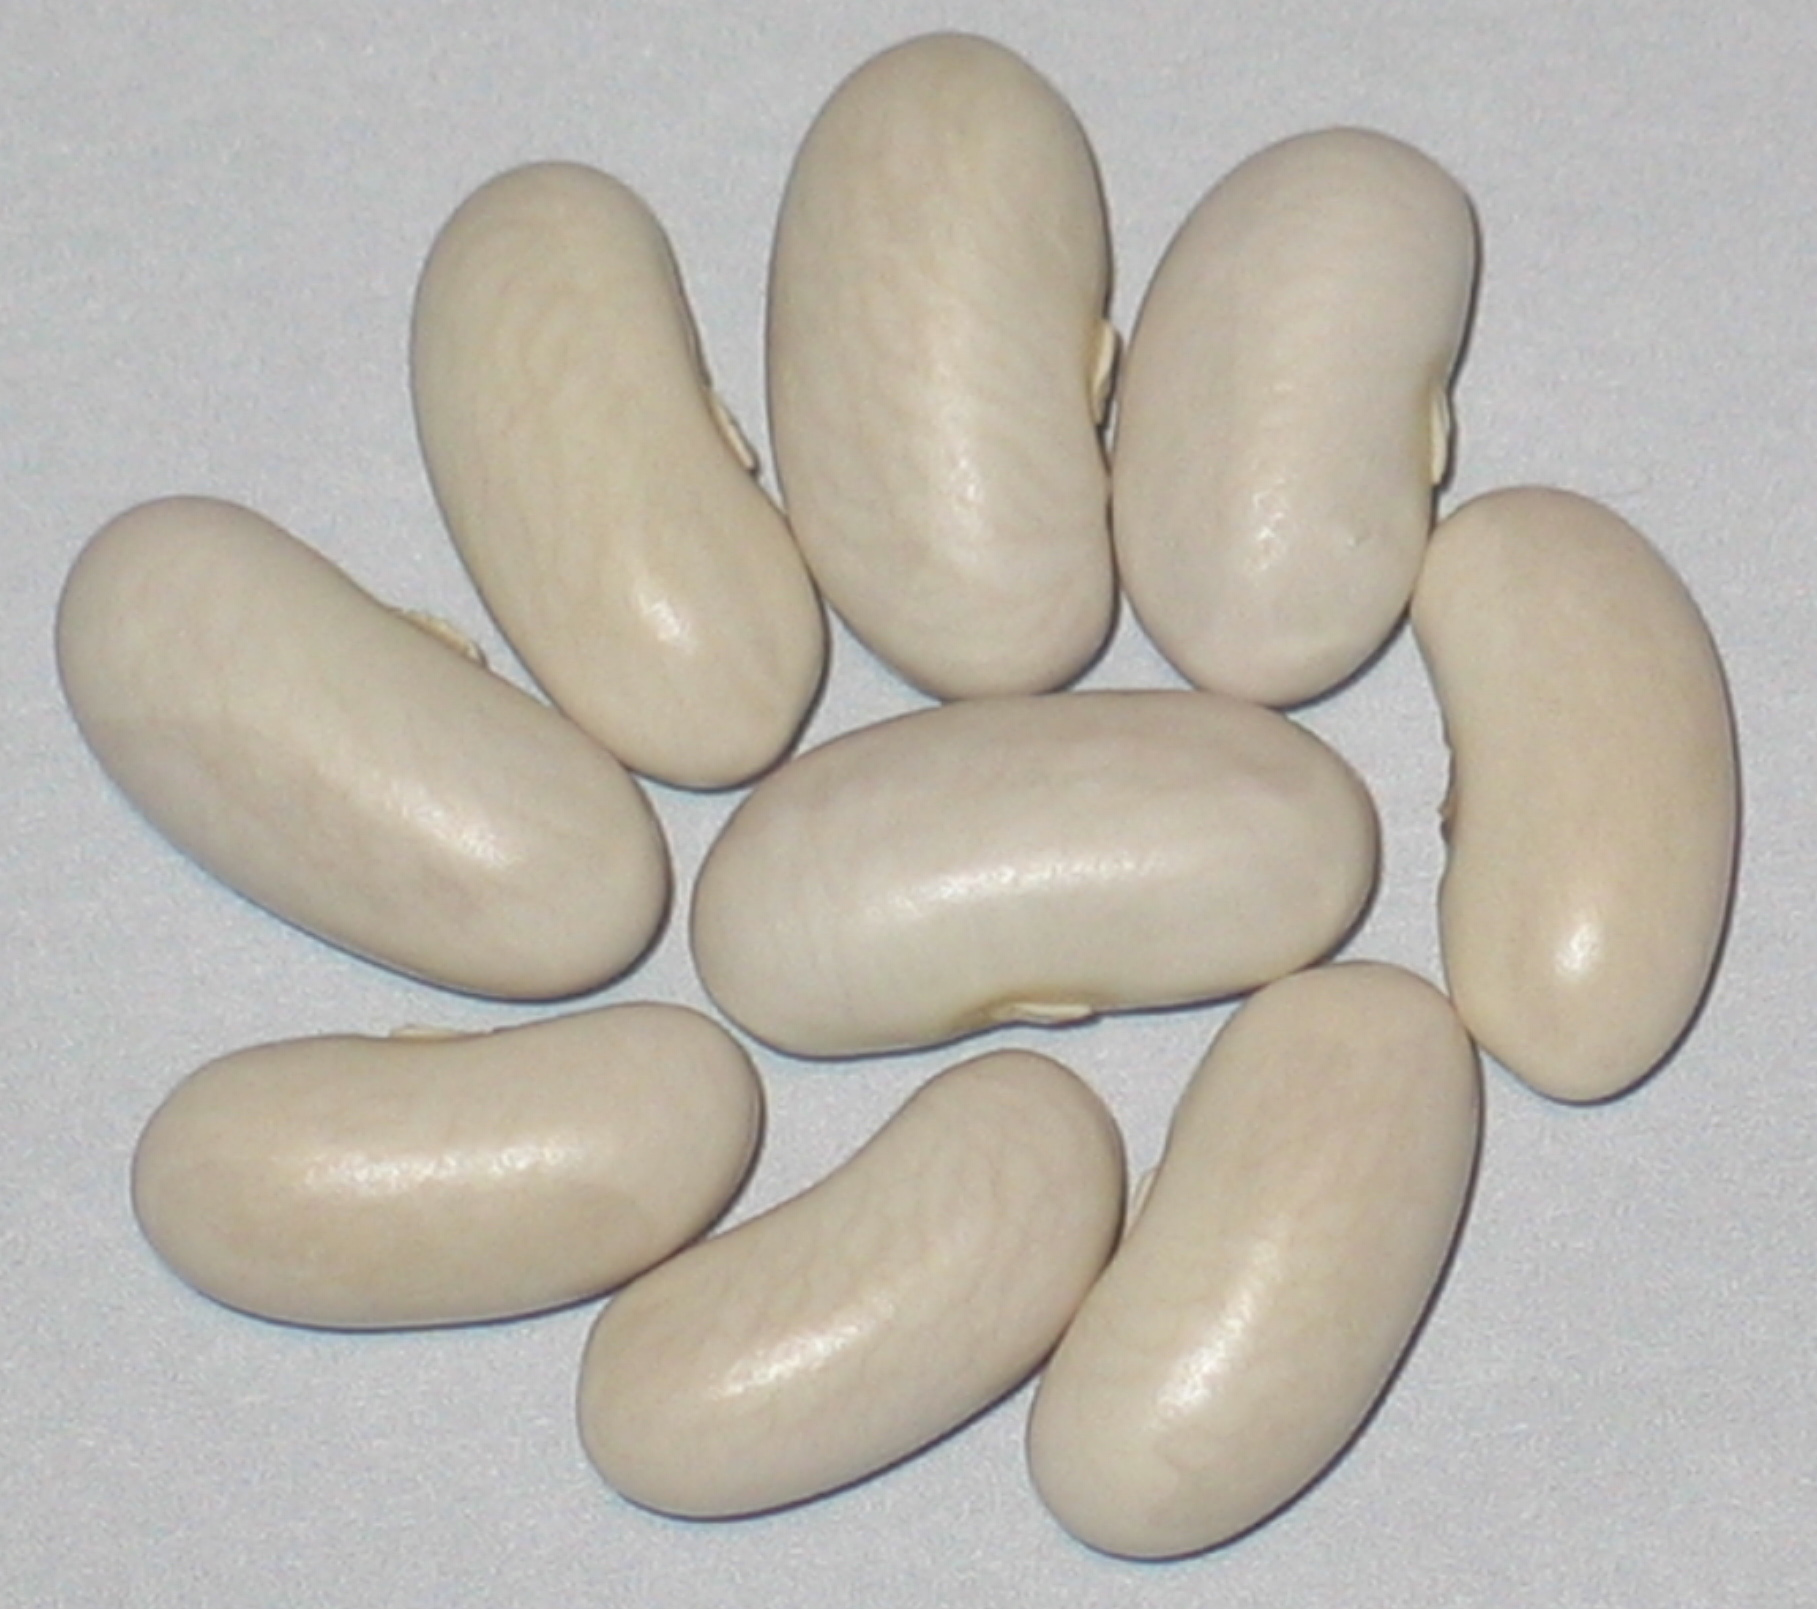 image of Cannellini beans